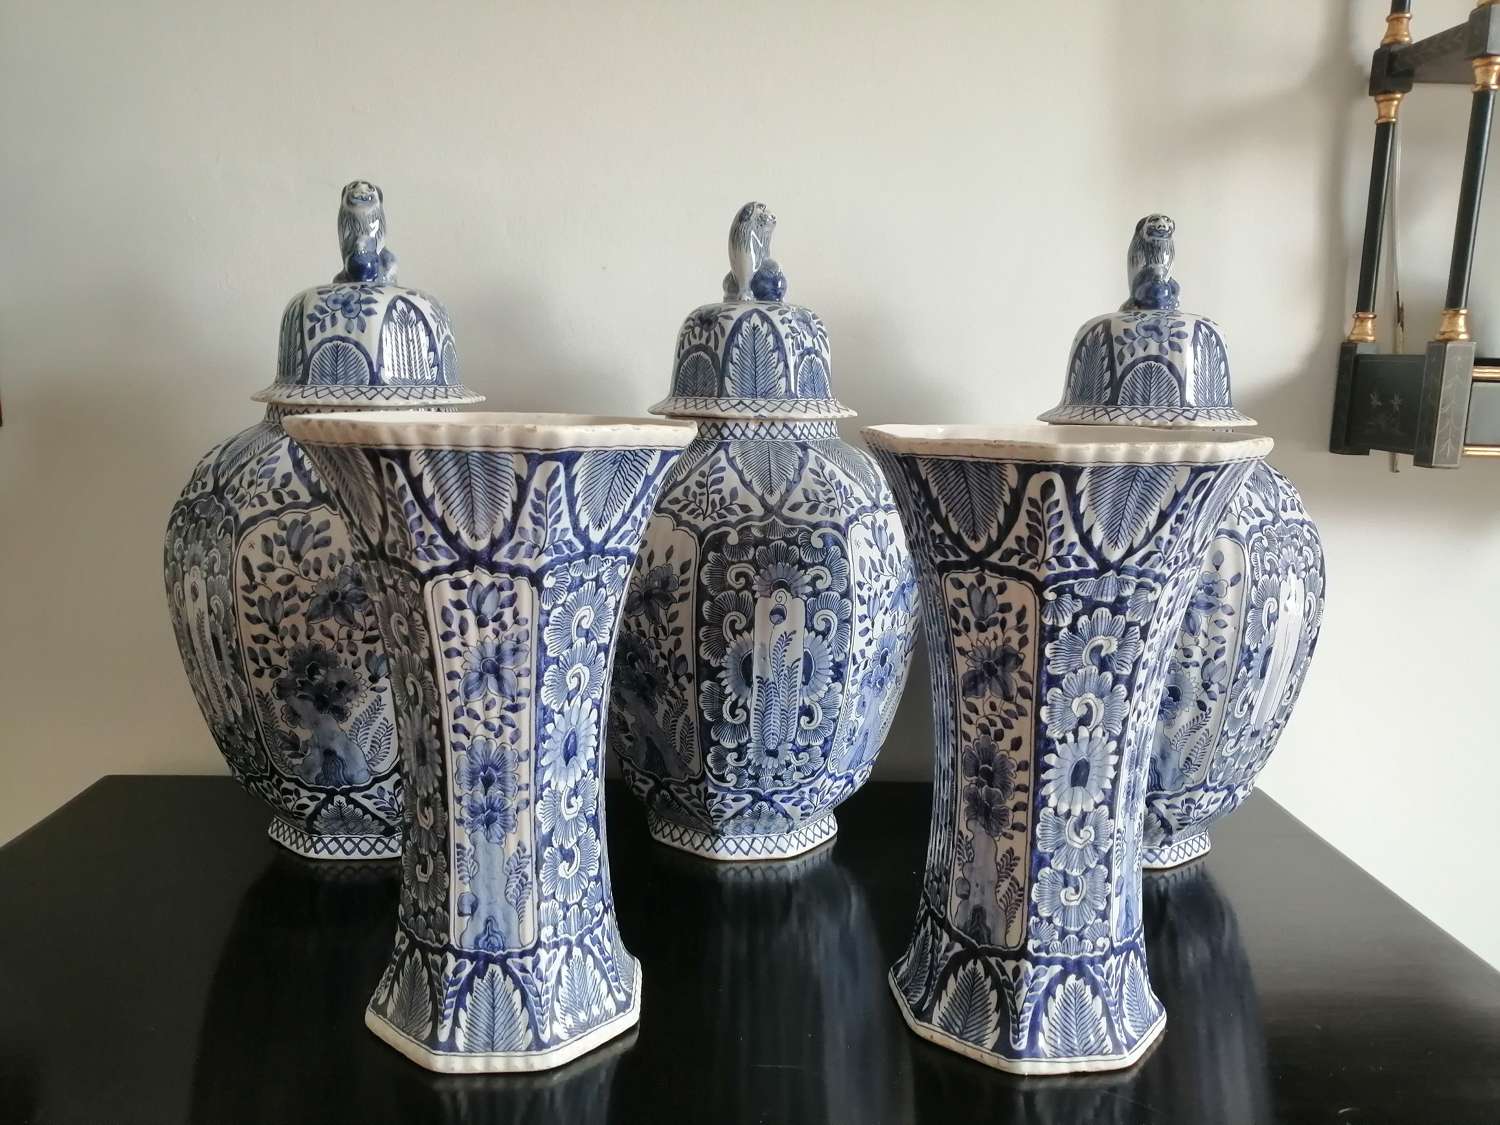 An impressive suite of Dutch Delft blue and white vases